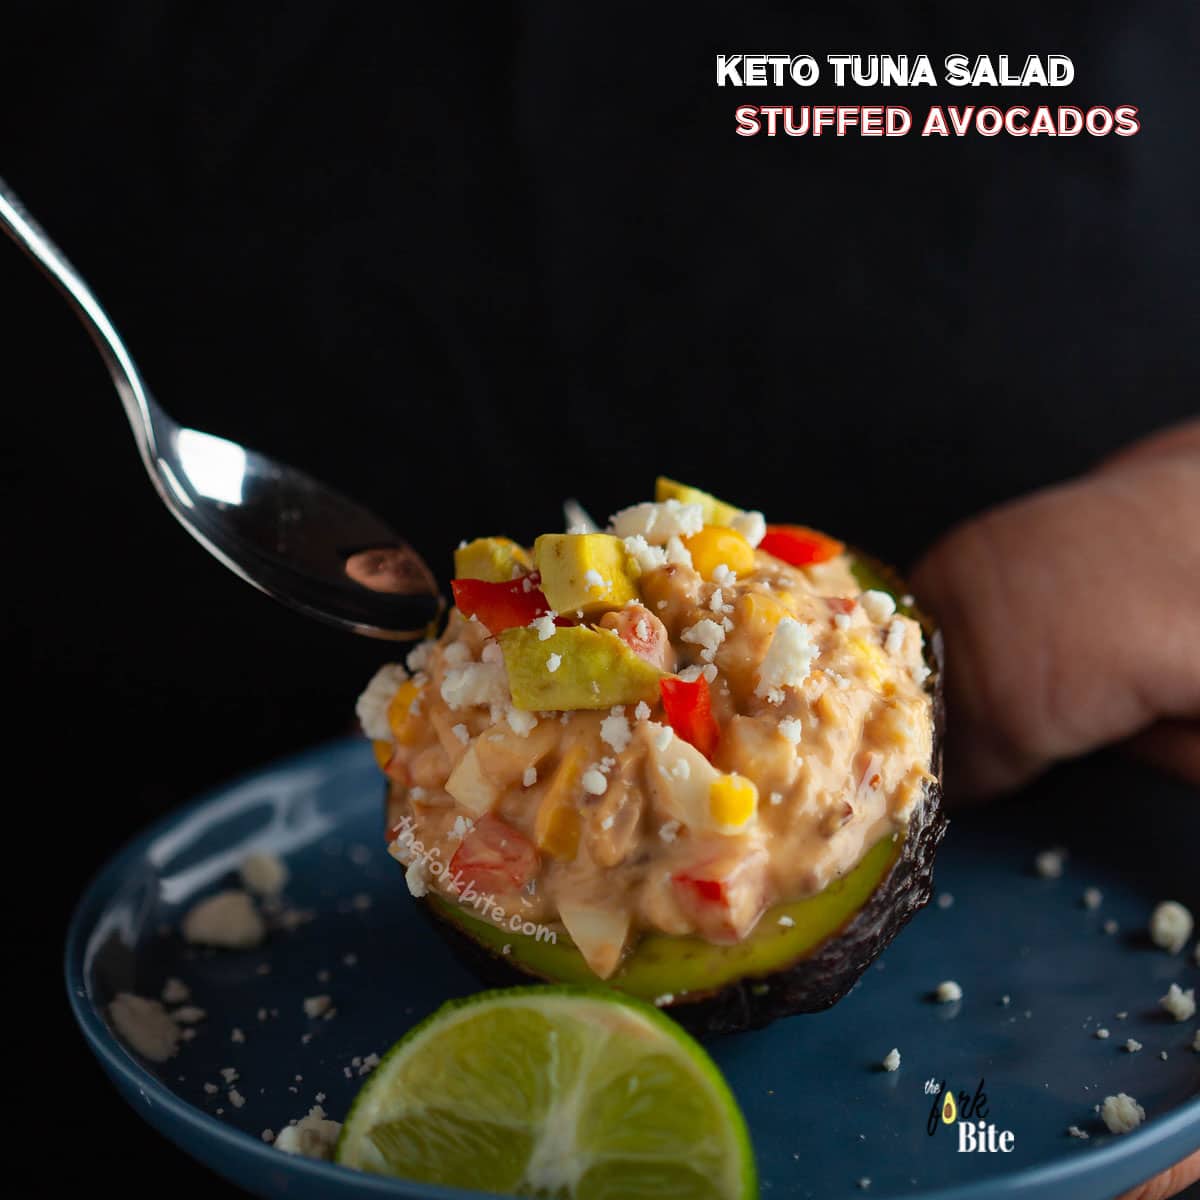 This keto tuna stuffed avocado recipe has been a life-saver. It ticks the right boxes for me because it satisfies my need for simple and basic ingredients.